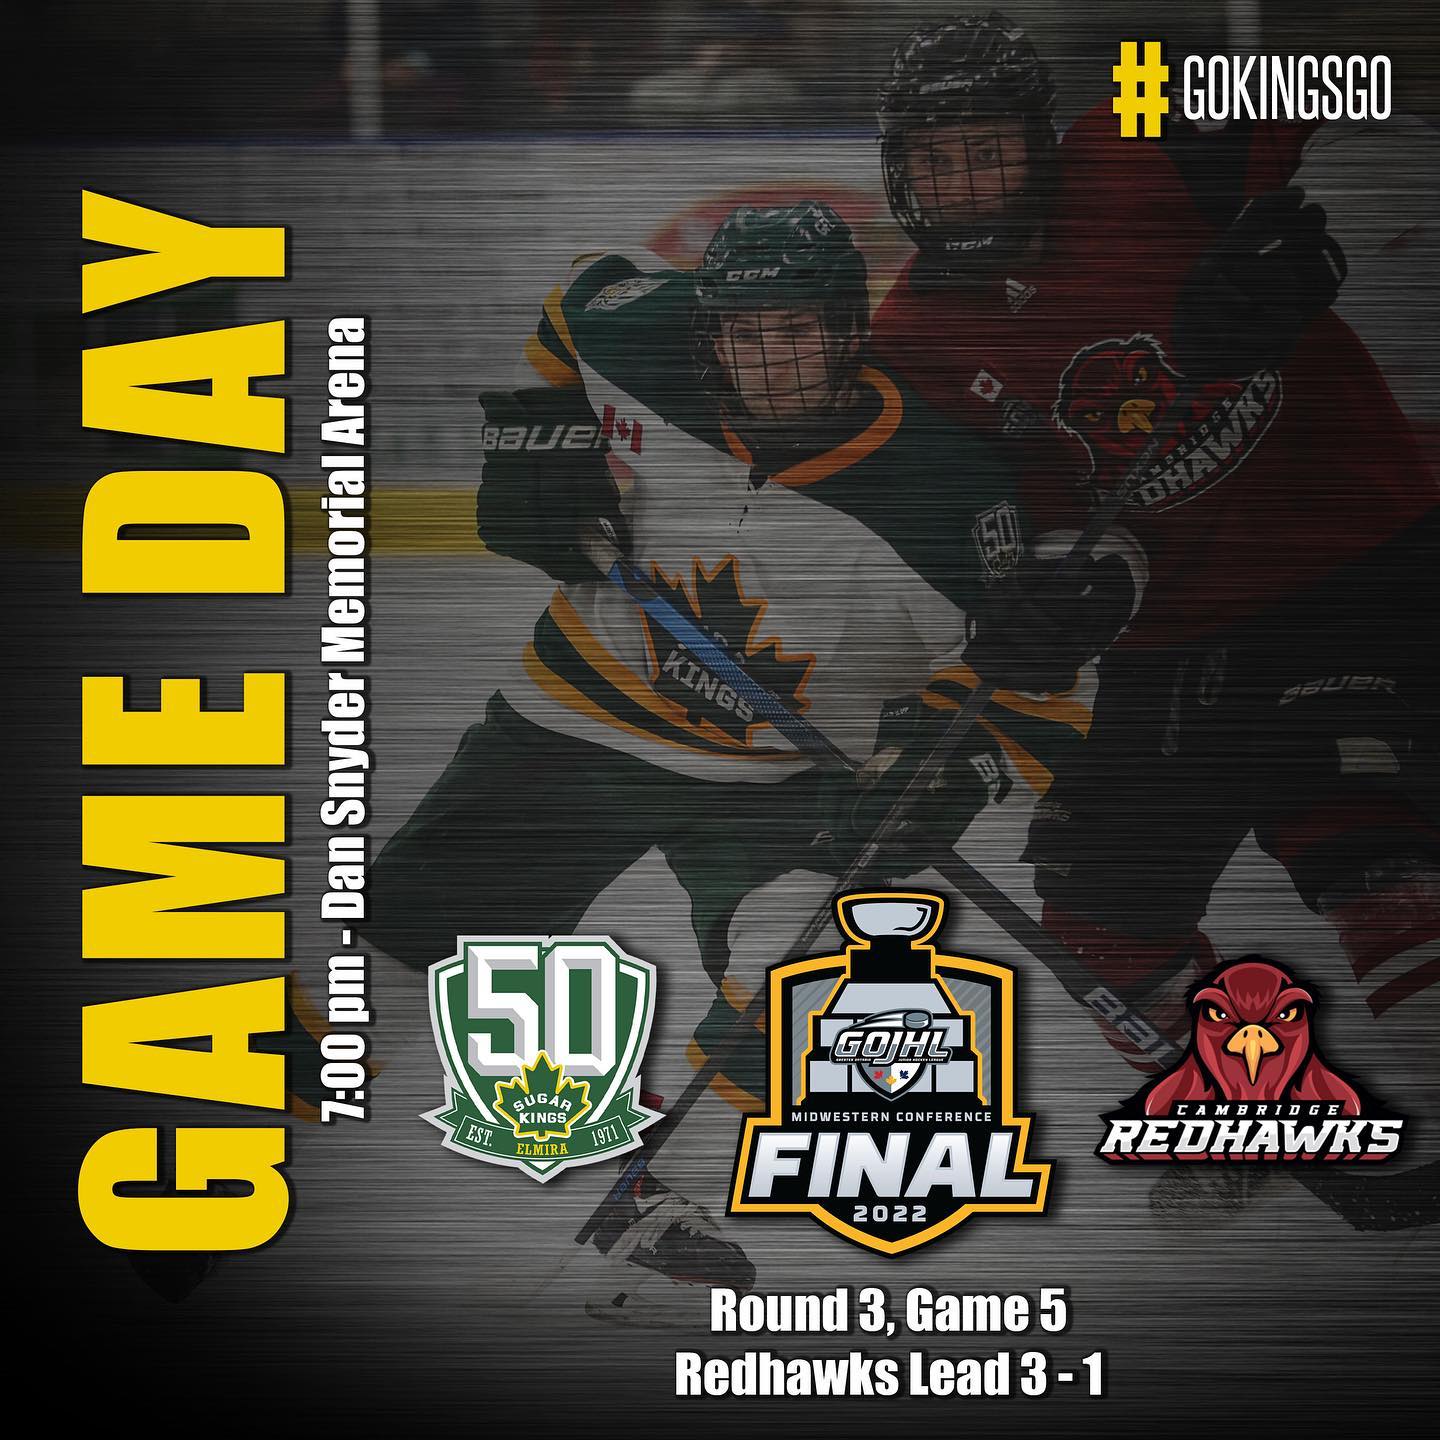 We're looking for a #bigwin tonight to stay alive and force a game 6. Let's pack the house and cheer the boys on! #GoKingsGo #DoOrDie 
#playoffshockey #gojhl #gojhlplayoffs2022 #cherreycupfinals